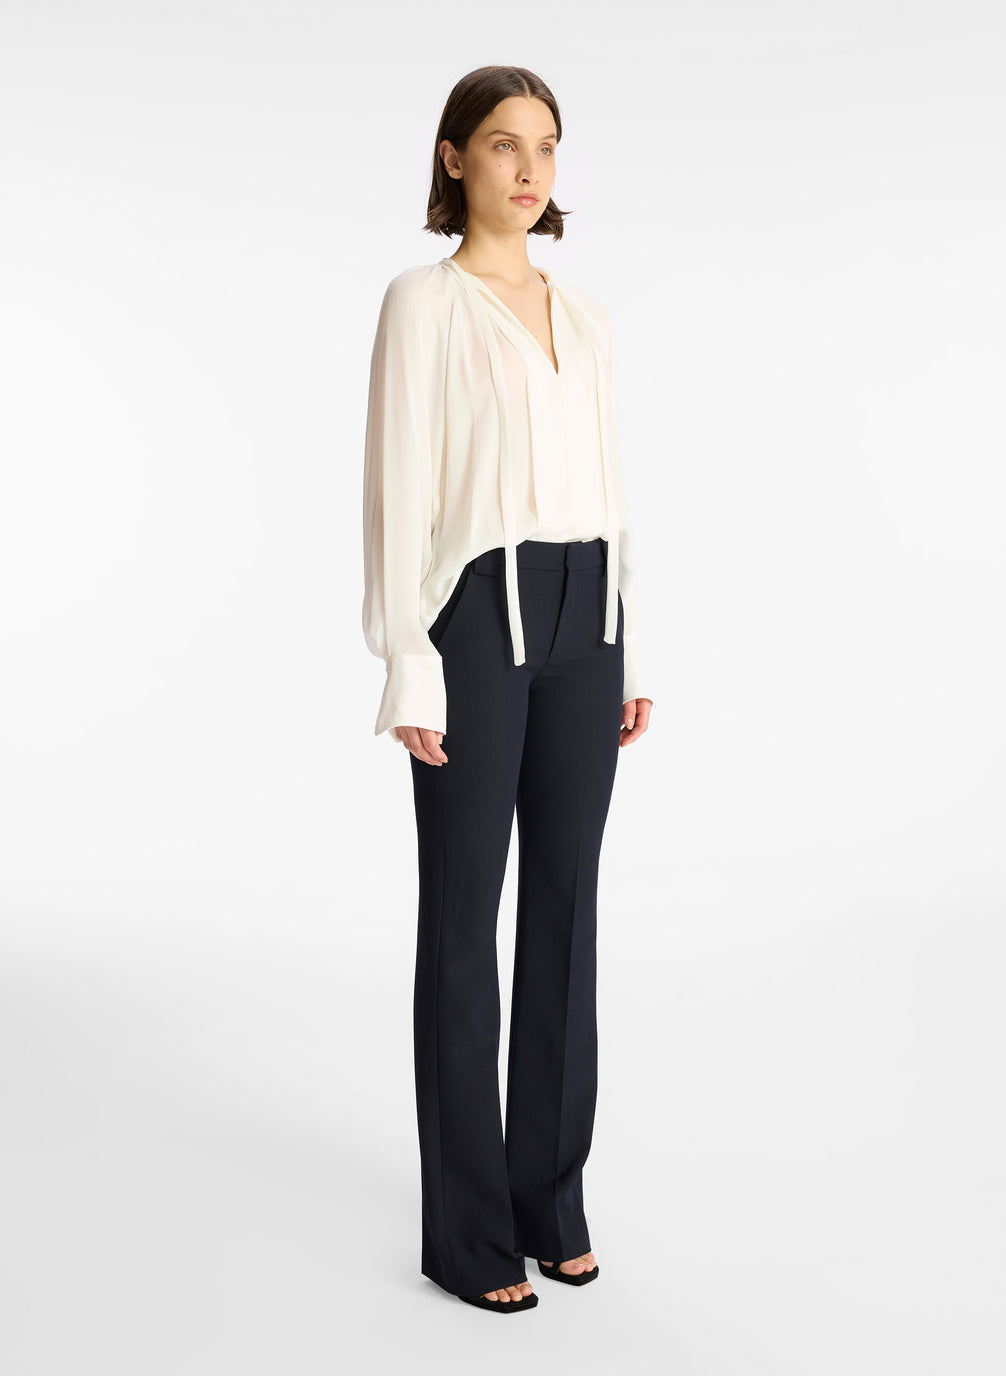 side view of woman wearing cream long sleeve v neck blouse and navy blue pants